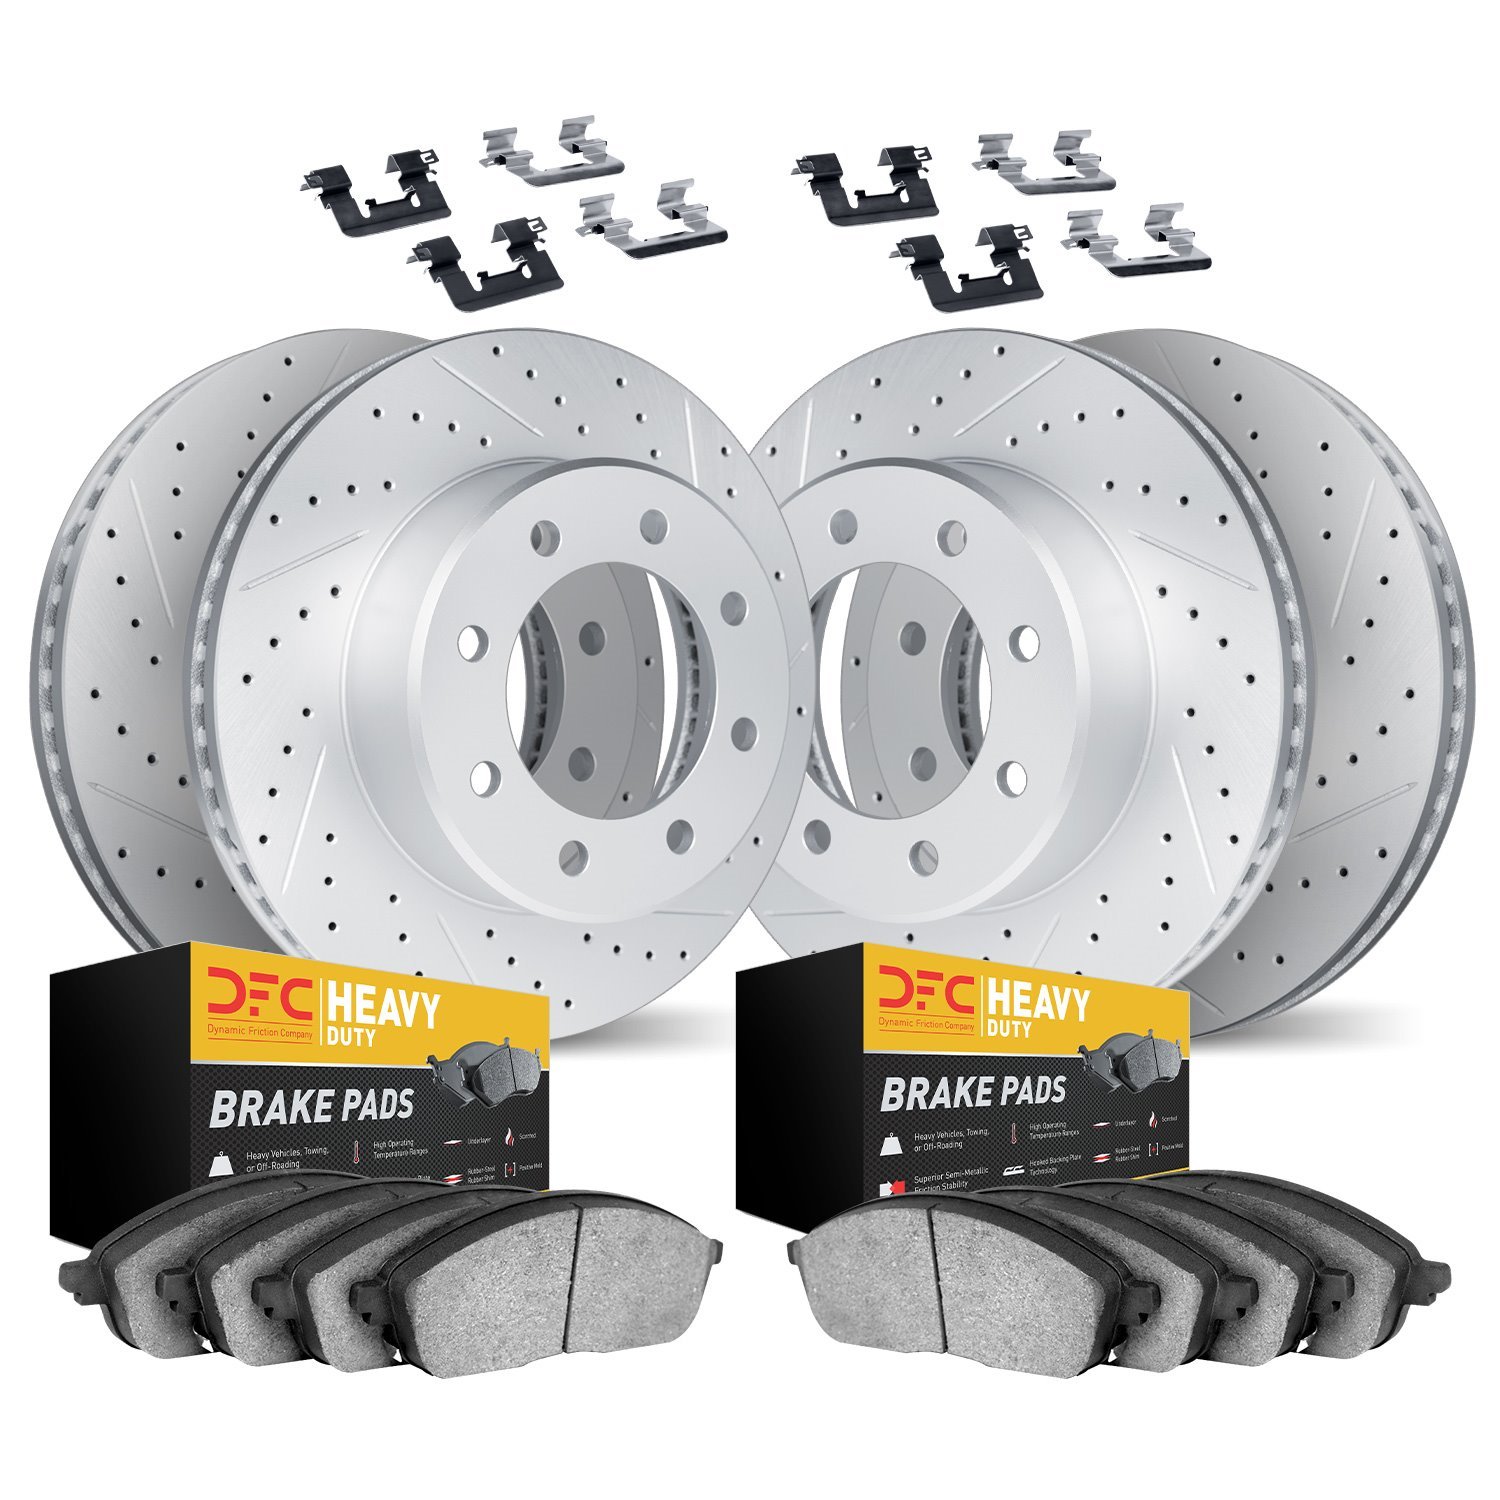 2214-99082 Geoperformance Drilled/Slotted Rotors w/Heavy-Duty Pads Kit & Hardware, 2010-2012 Ford/Lincoln/Mercury/Mazda, Positio